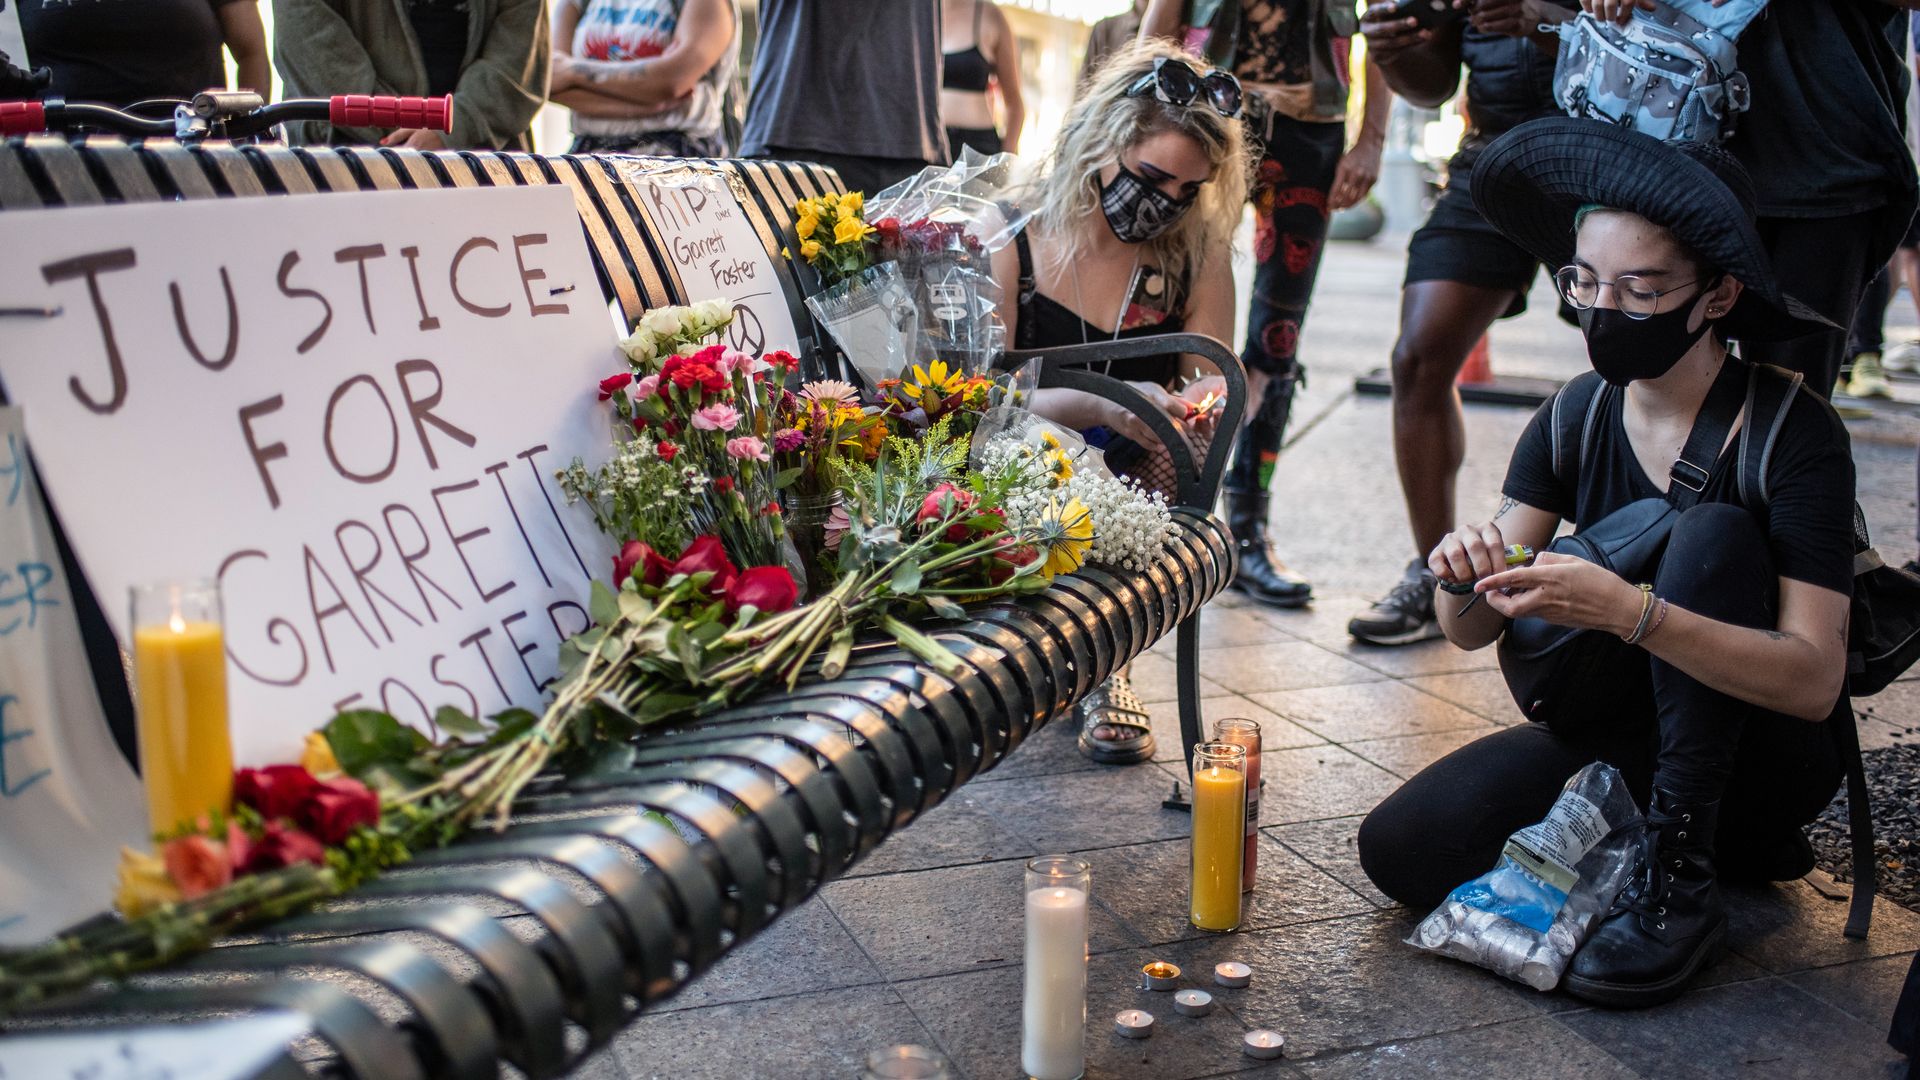 An attendee lights a candle at a vigil for Garrett Foster on July 26, 2020 in downtown Austin, Texas